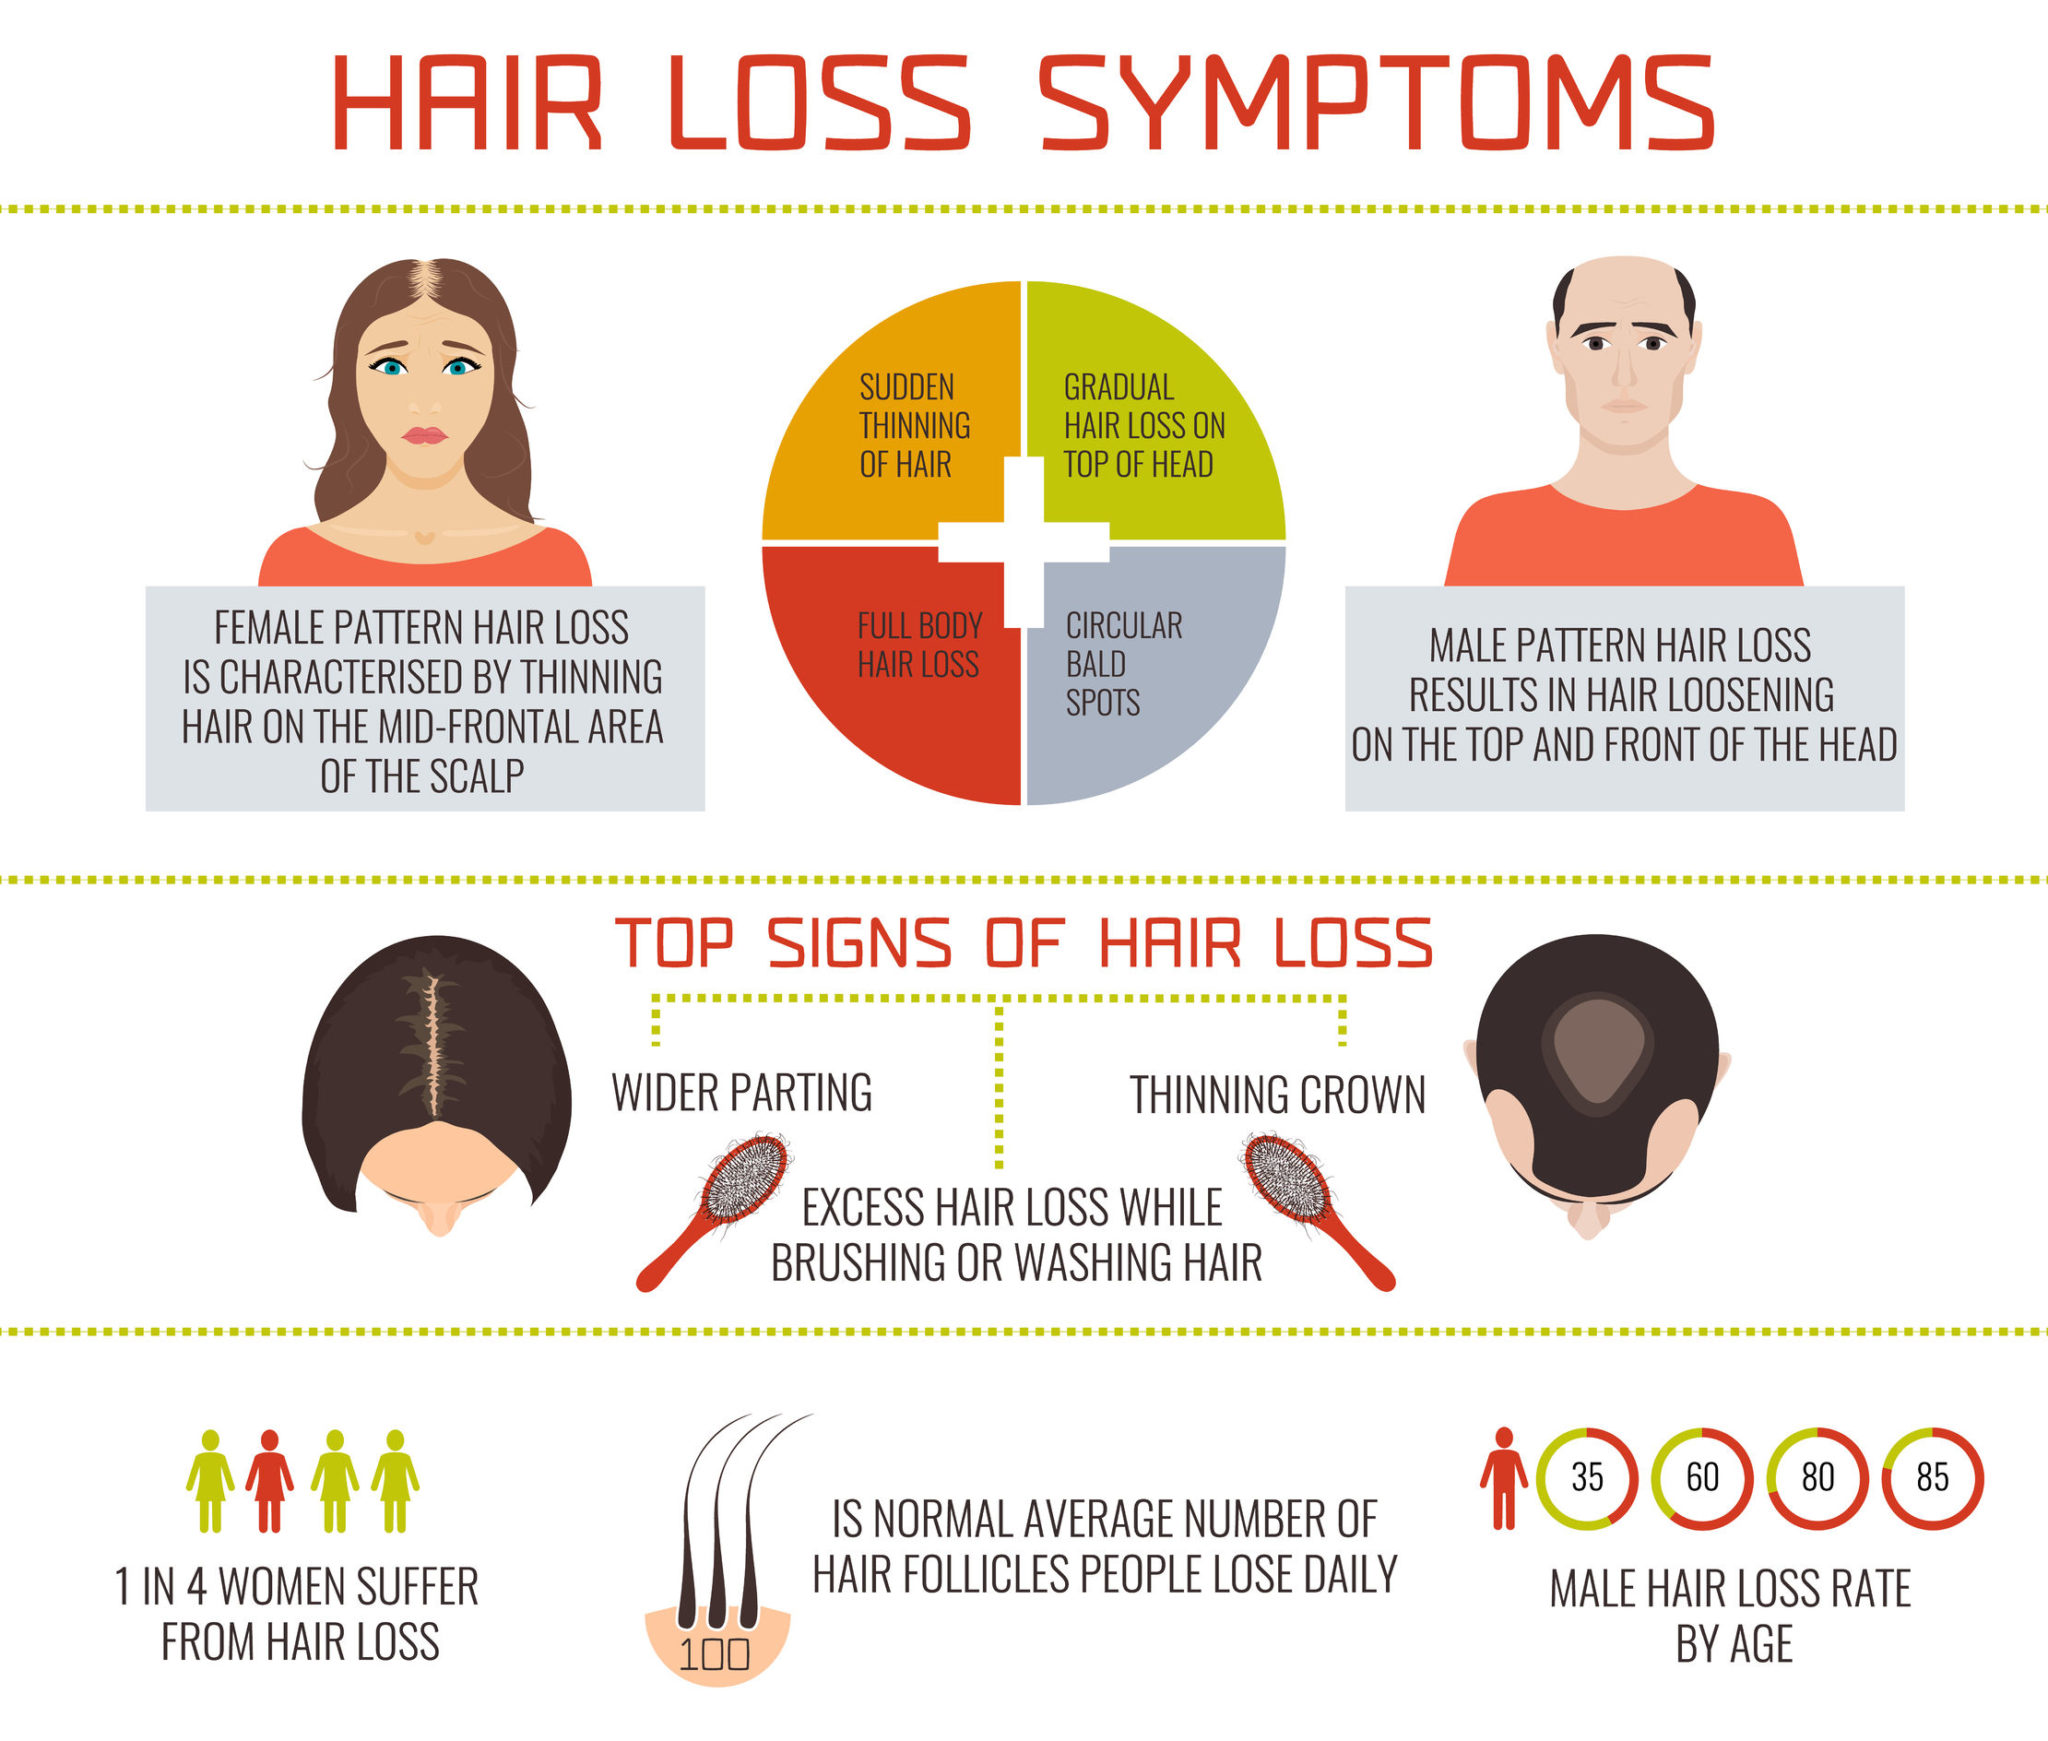 What Are the Symptoms of Hair Loss